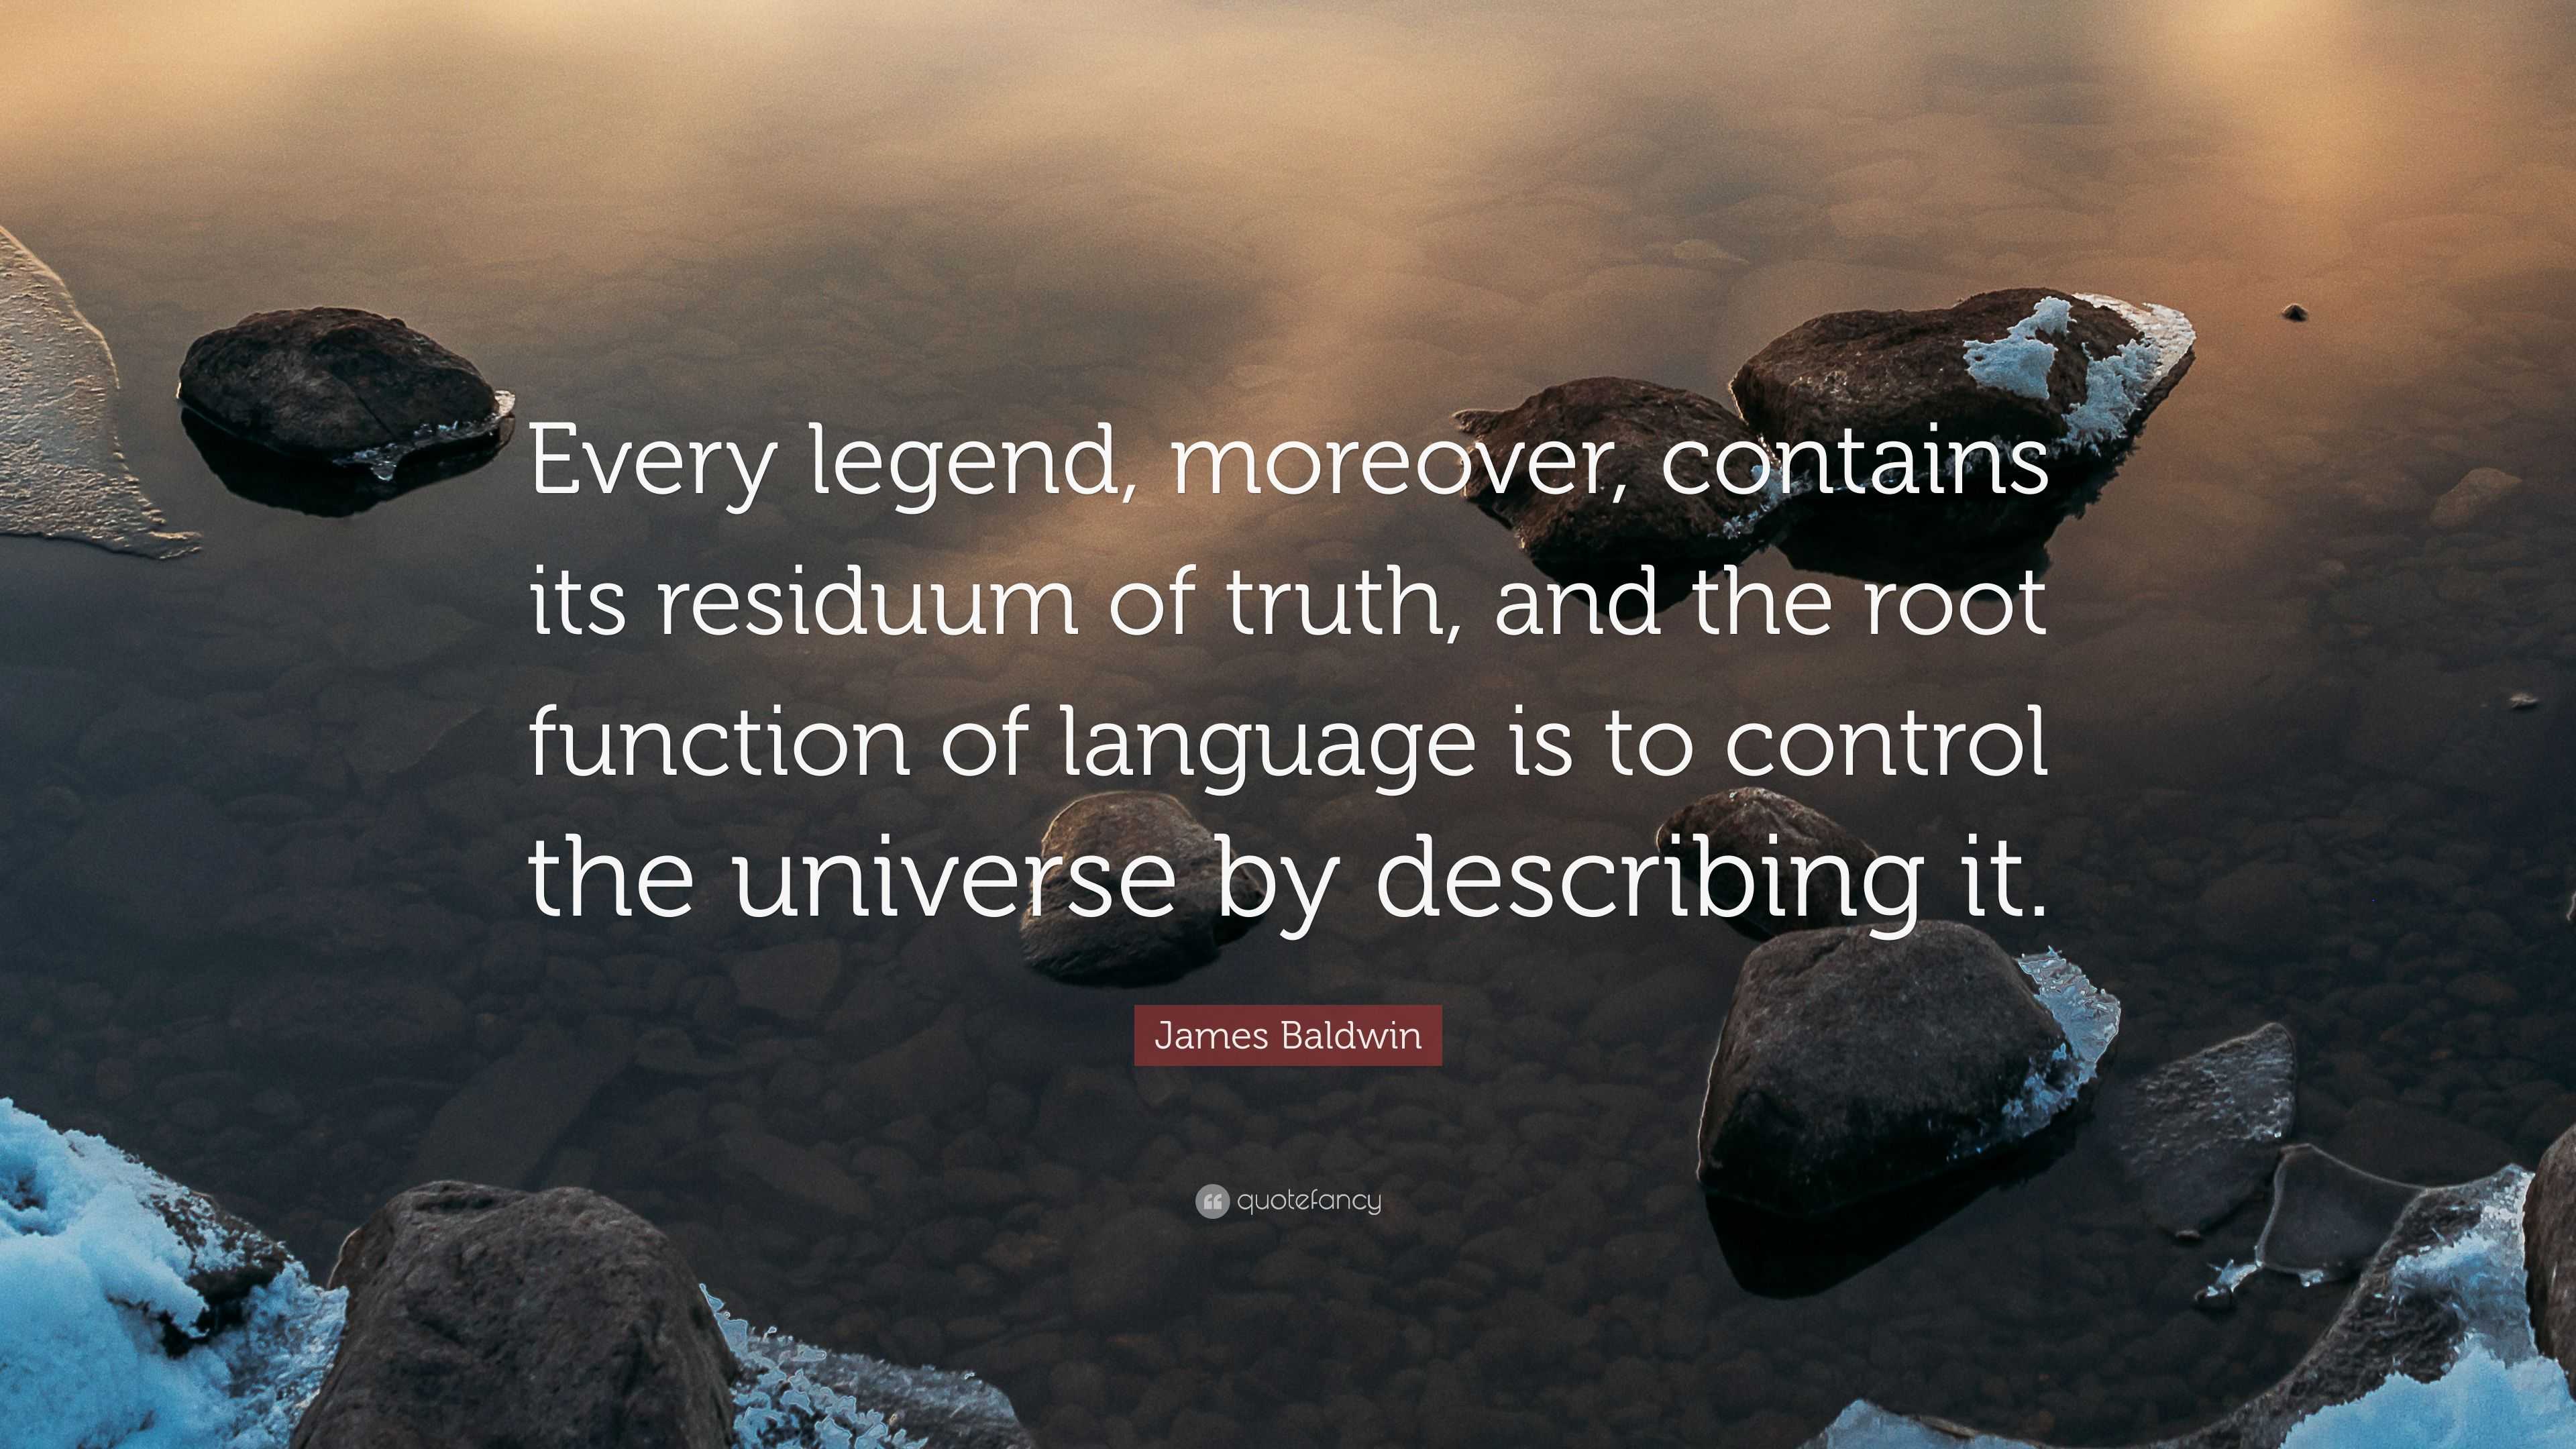 James Baldwin Quote: “Every legend, moreover, contains its residuum of ...